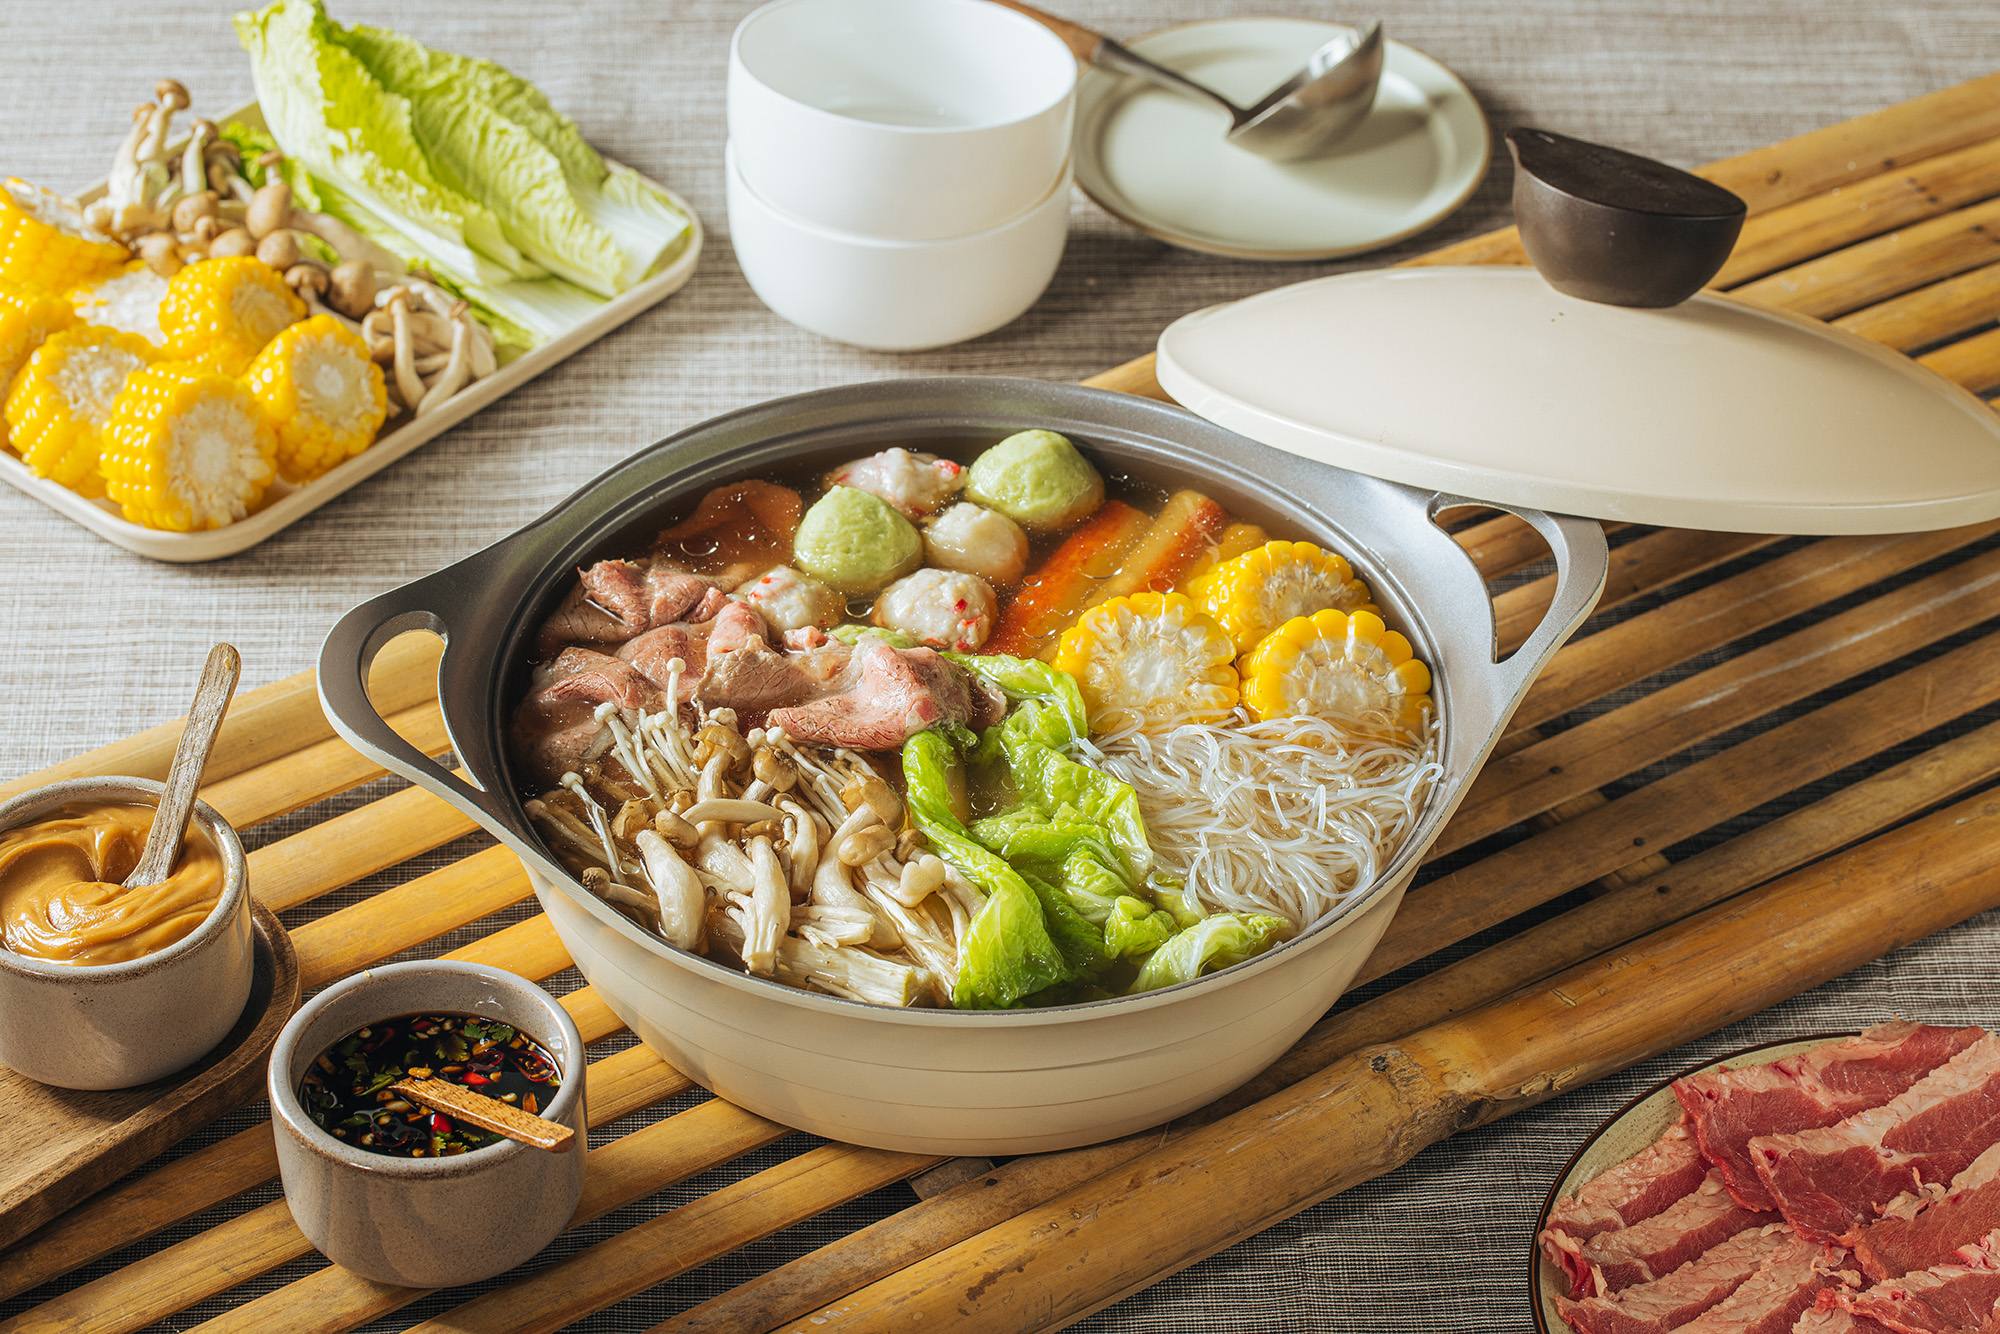 A 30-Min Hot Pot Recipe If You're Staying Home